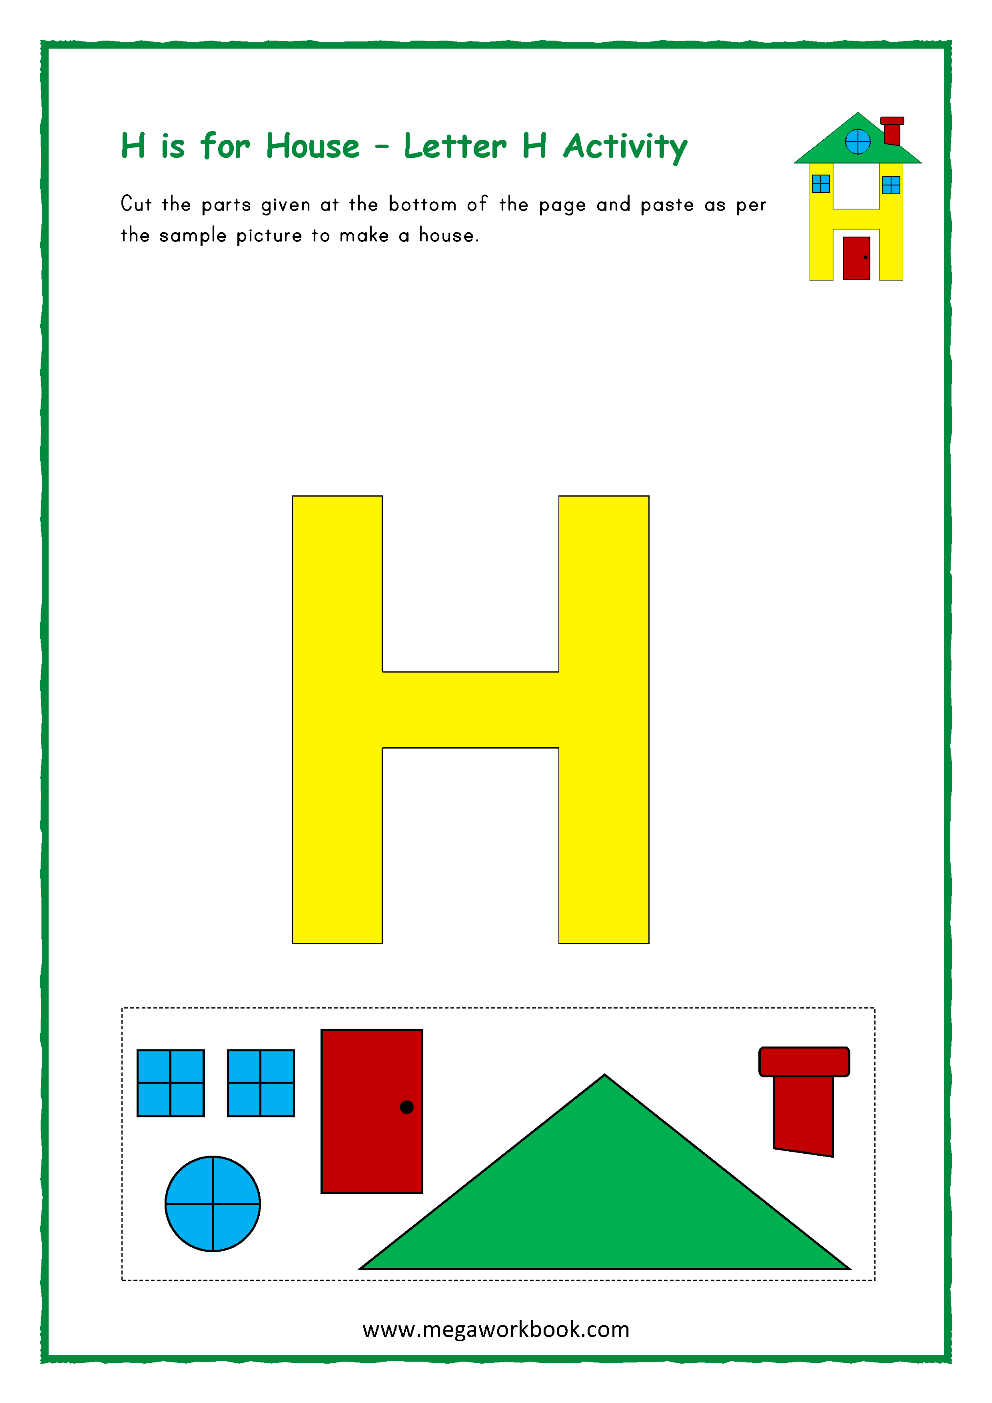 h-alphabet-craft-easy-letter-h-crafts-and-activities-sun